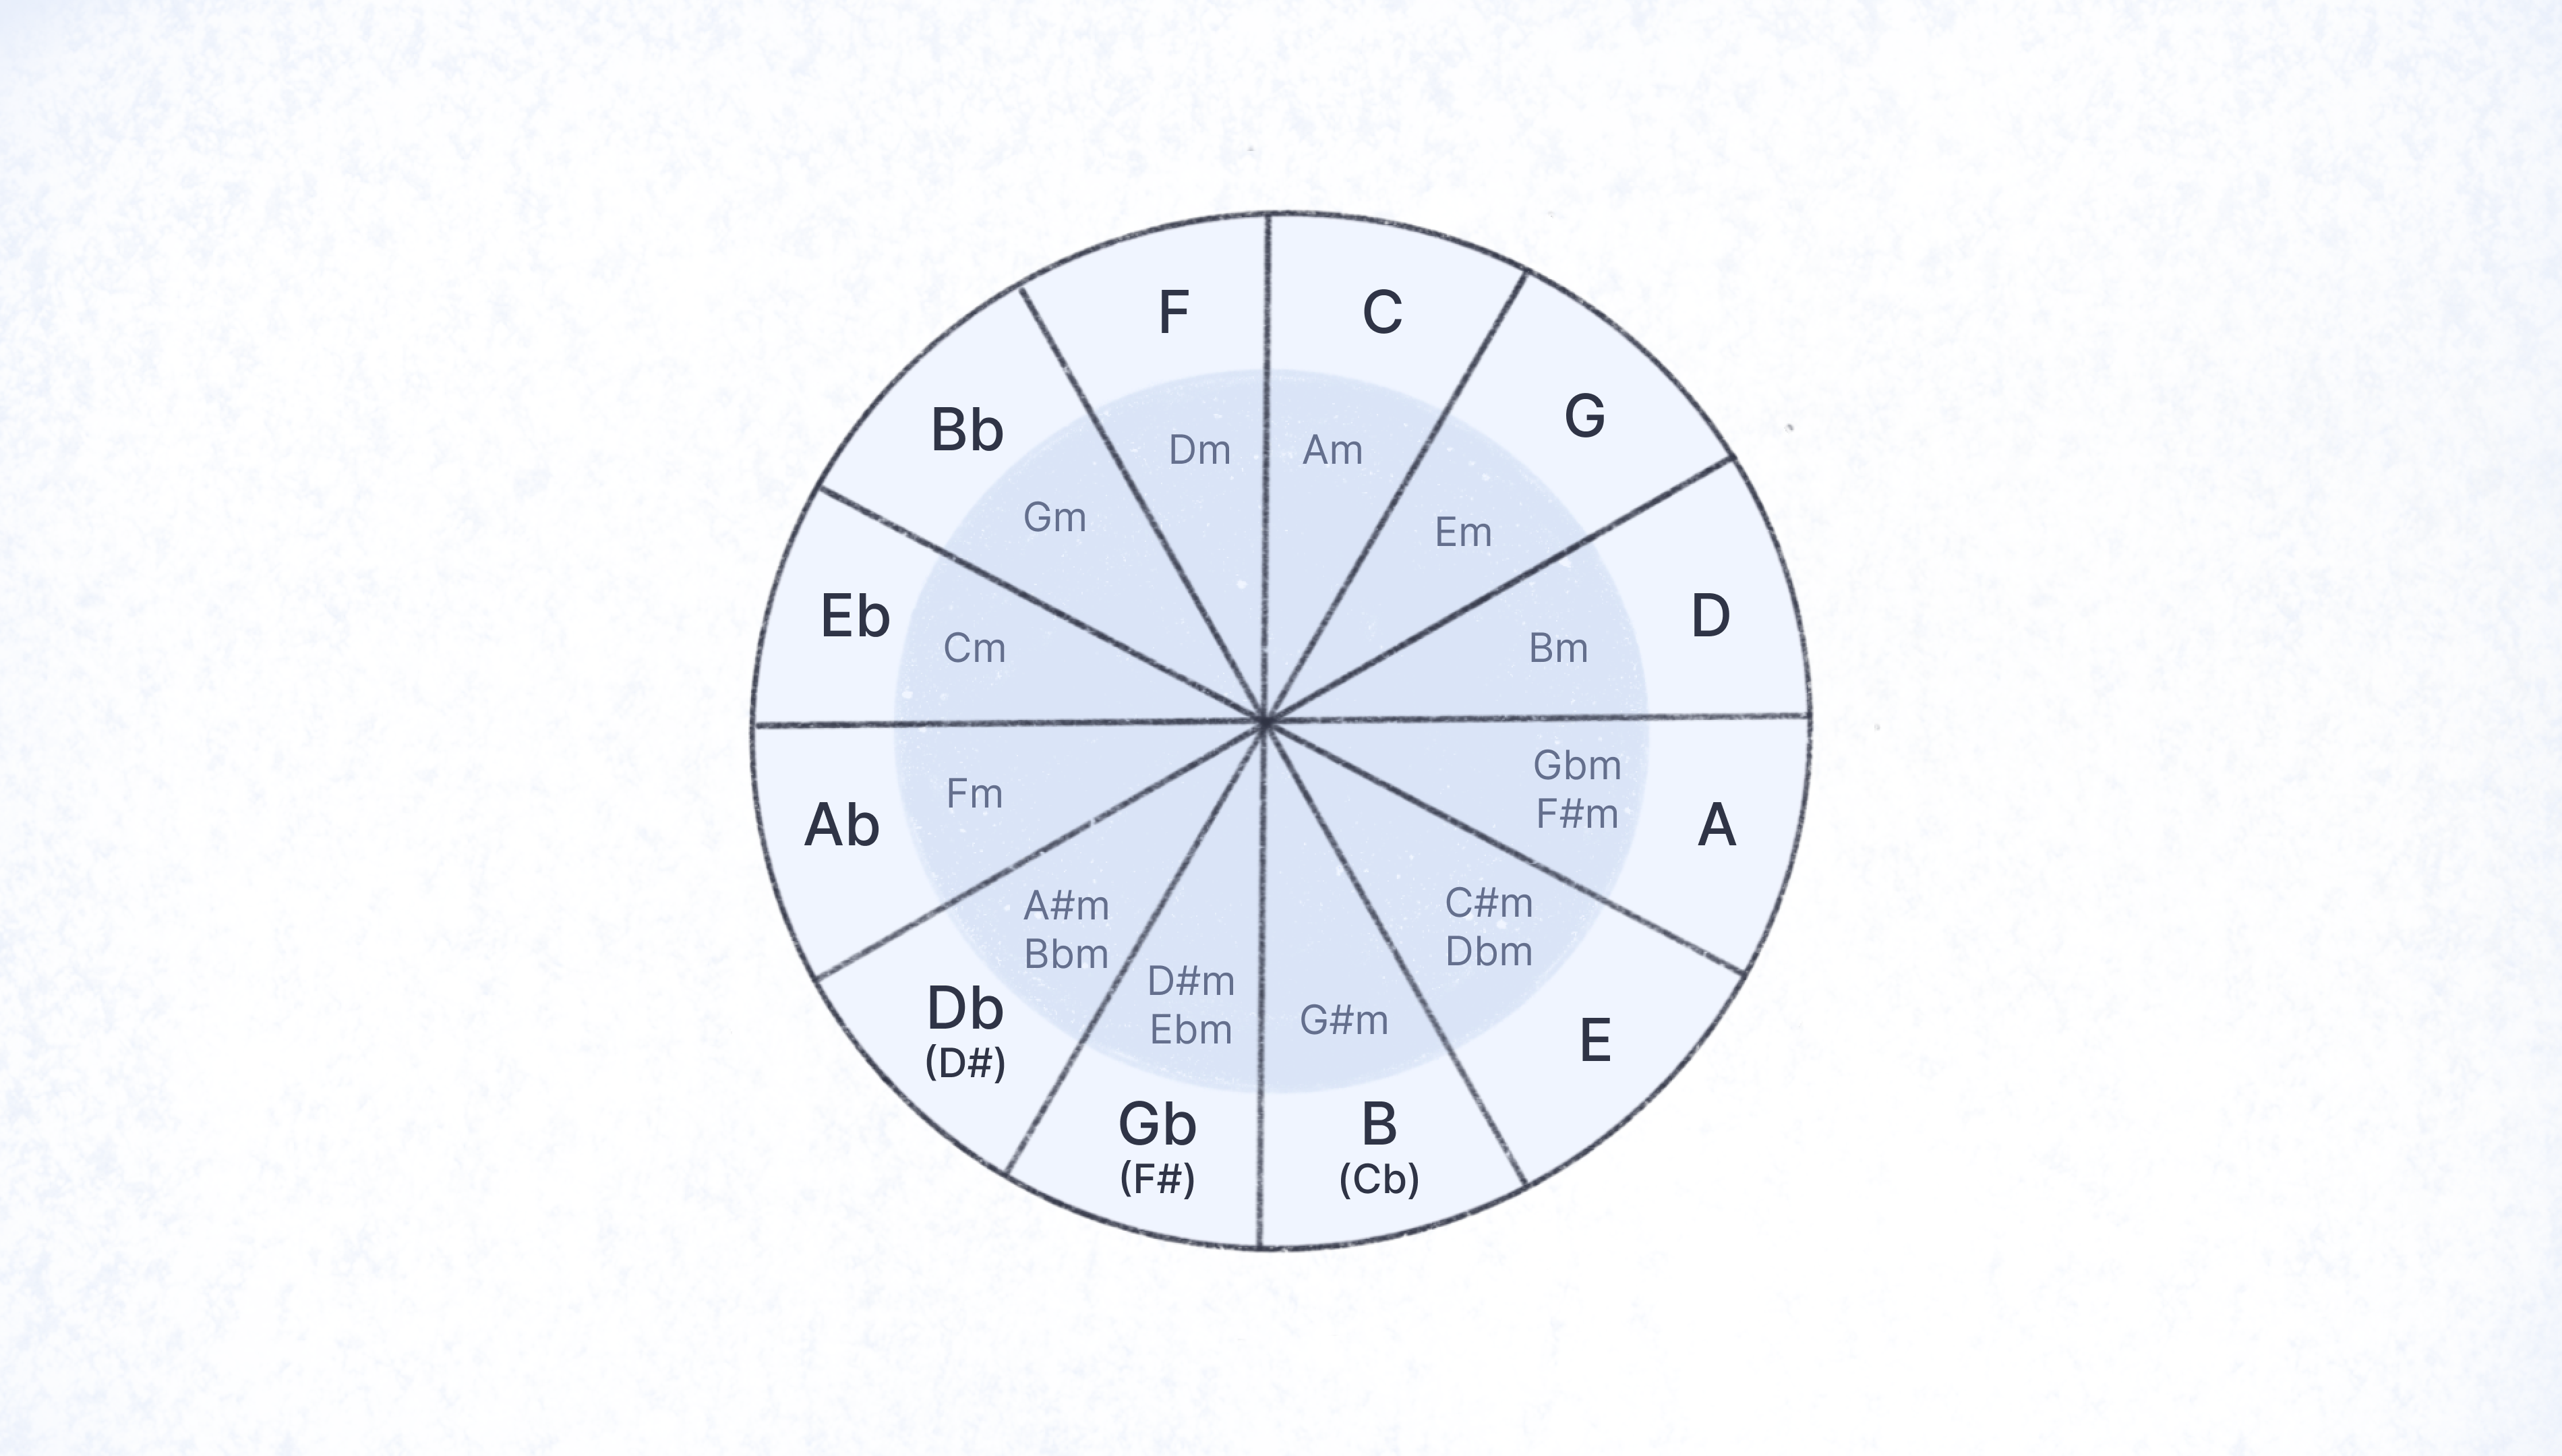 Hack the underlying structure of music with the circle of V